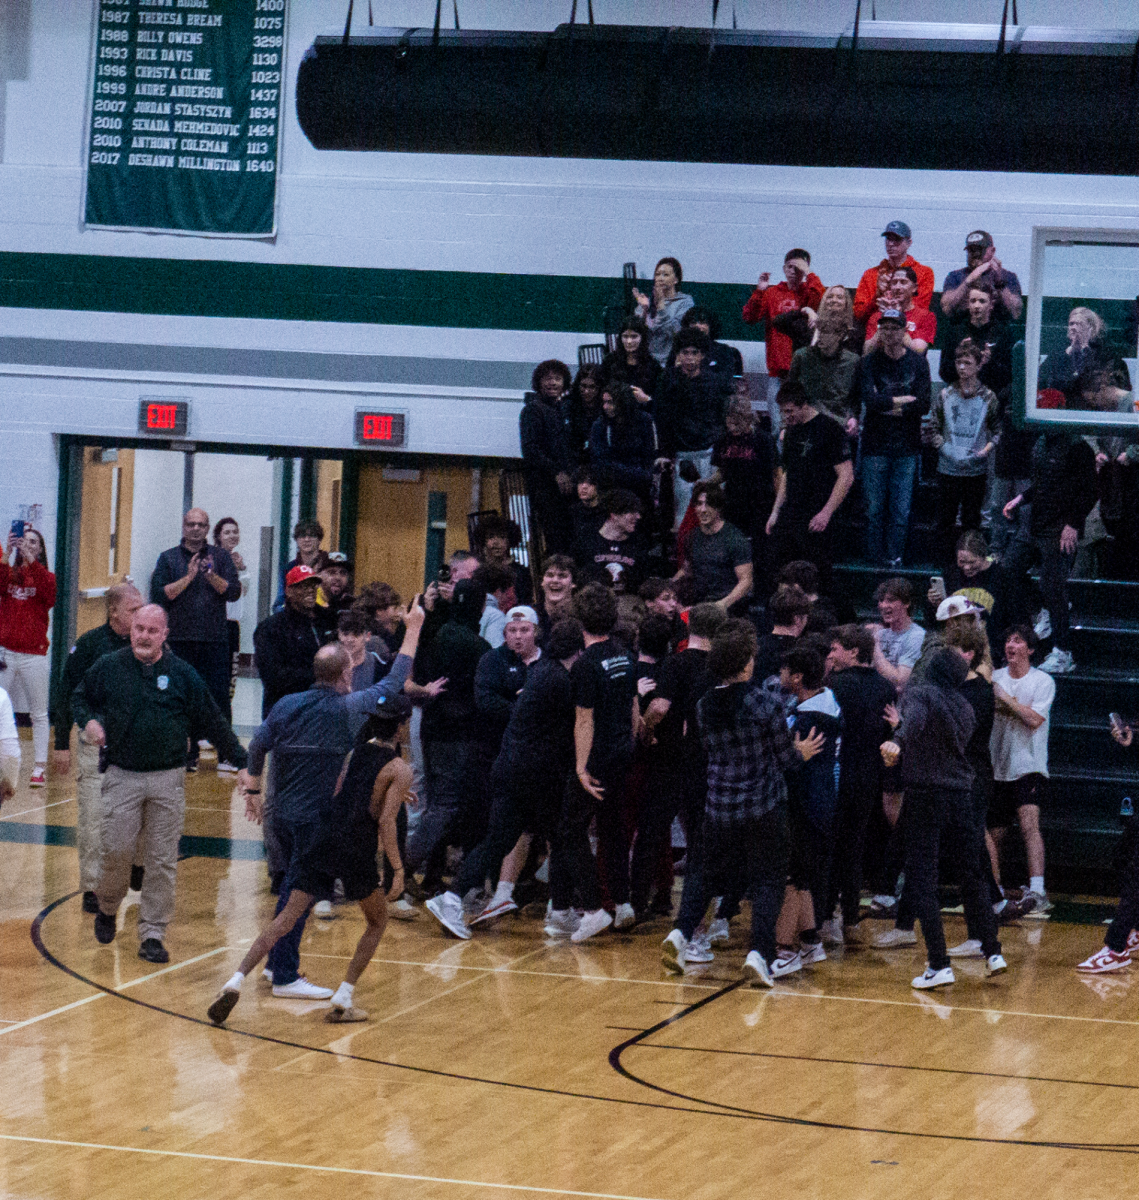 CV students storm the court after the win.